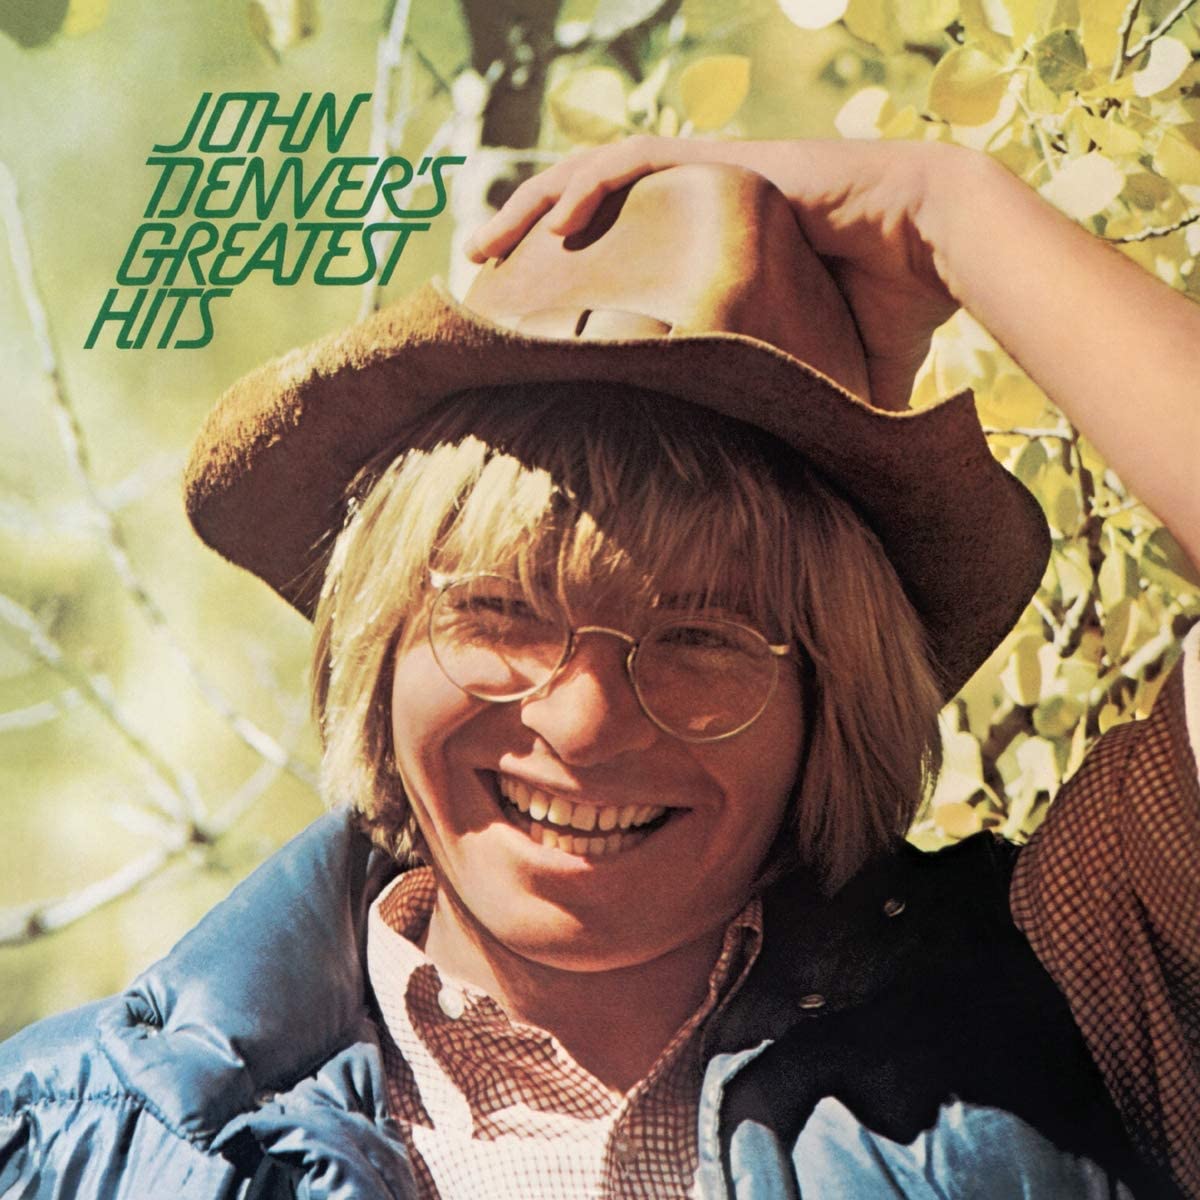 John Denver&#39;s Greatest Hits (Used) (Mint Condition)